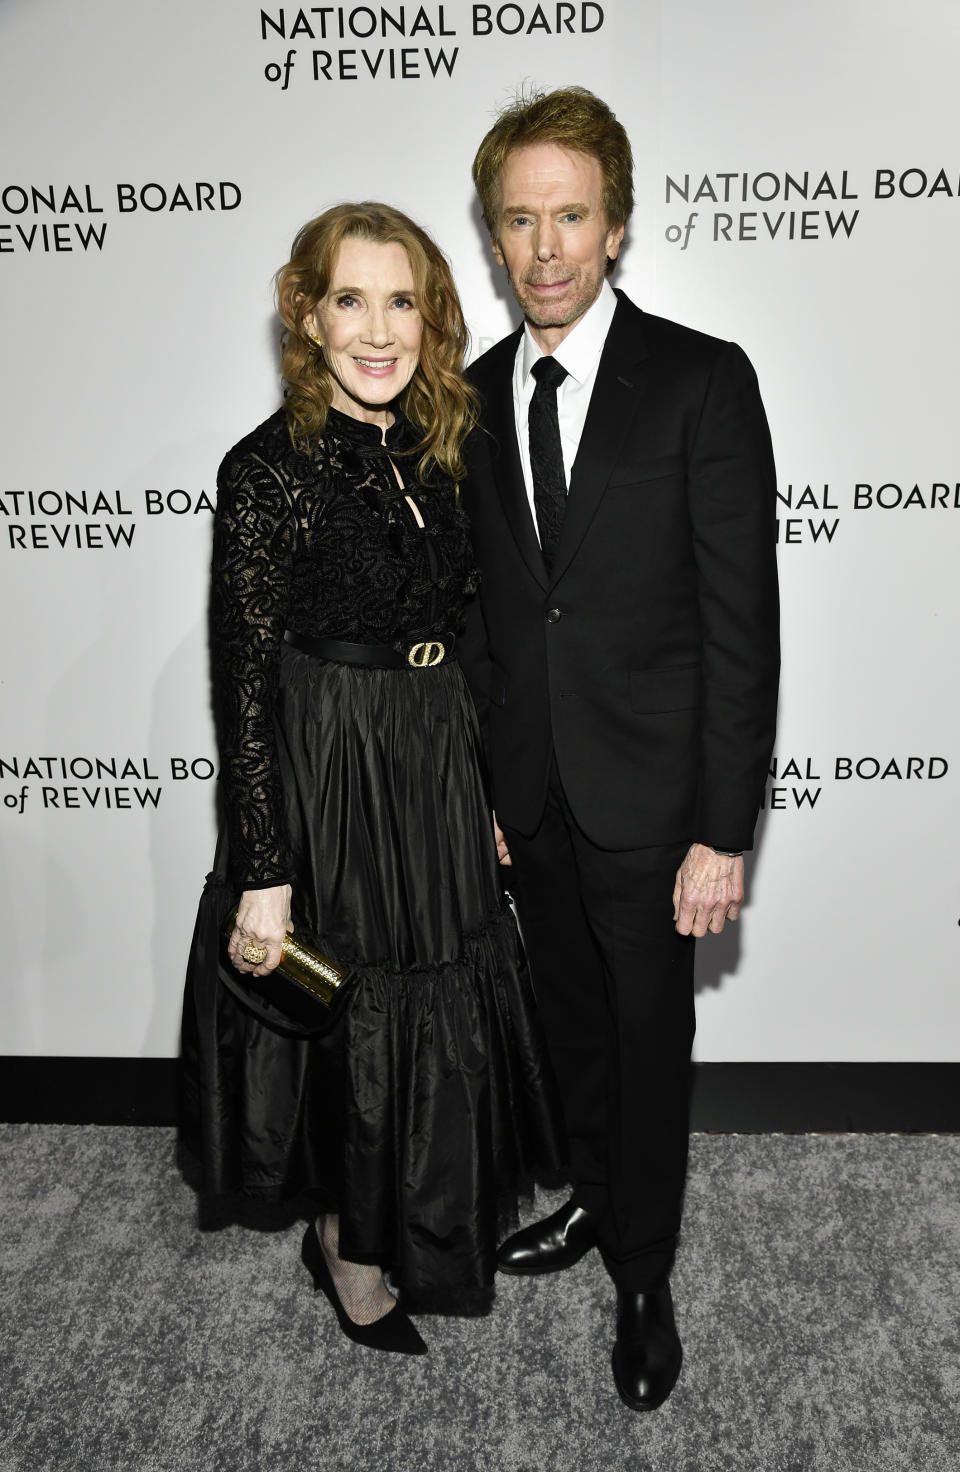 Producer Jerry Bruckheimer, right, and wife Linda Bruckheimer attend the National Board of Review Awards Gala at Cipriani 42nd Street on Sunday, Jan. 8, 2023, in New York. (Photo by Evan Agostini/Invision/AP)